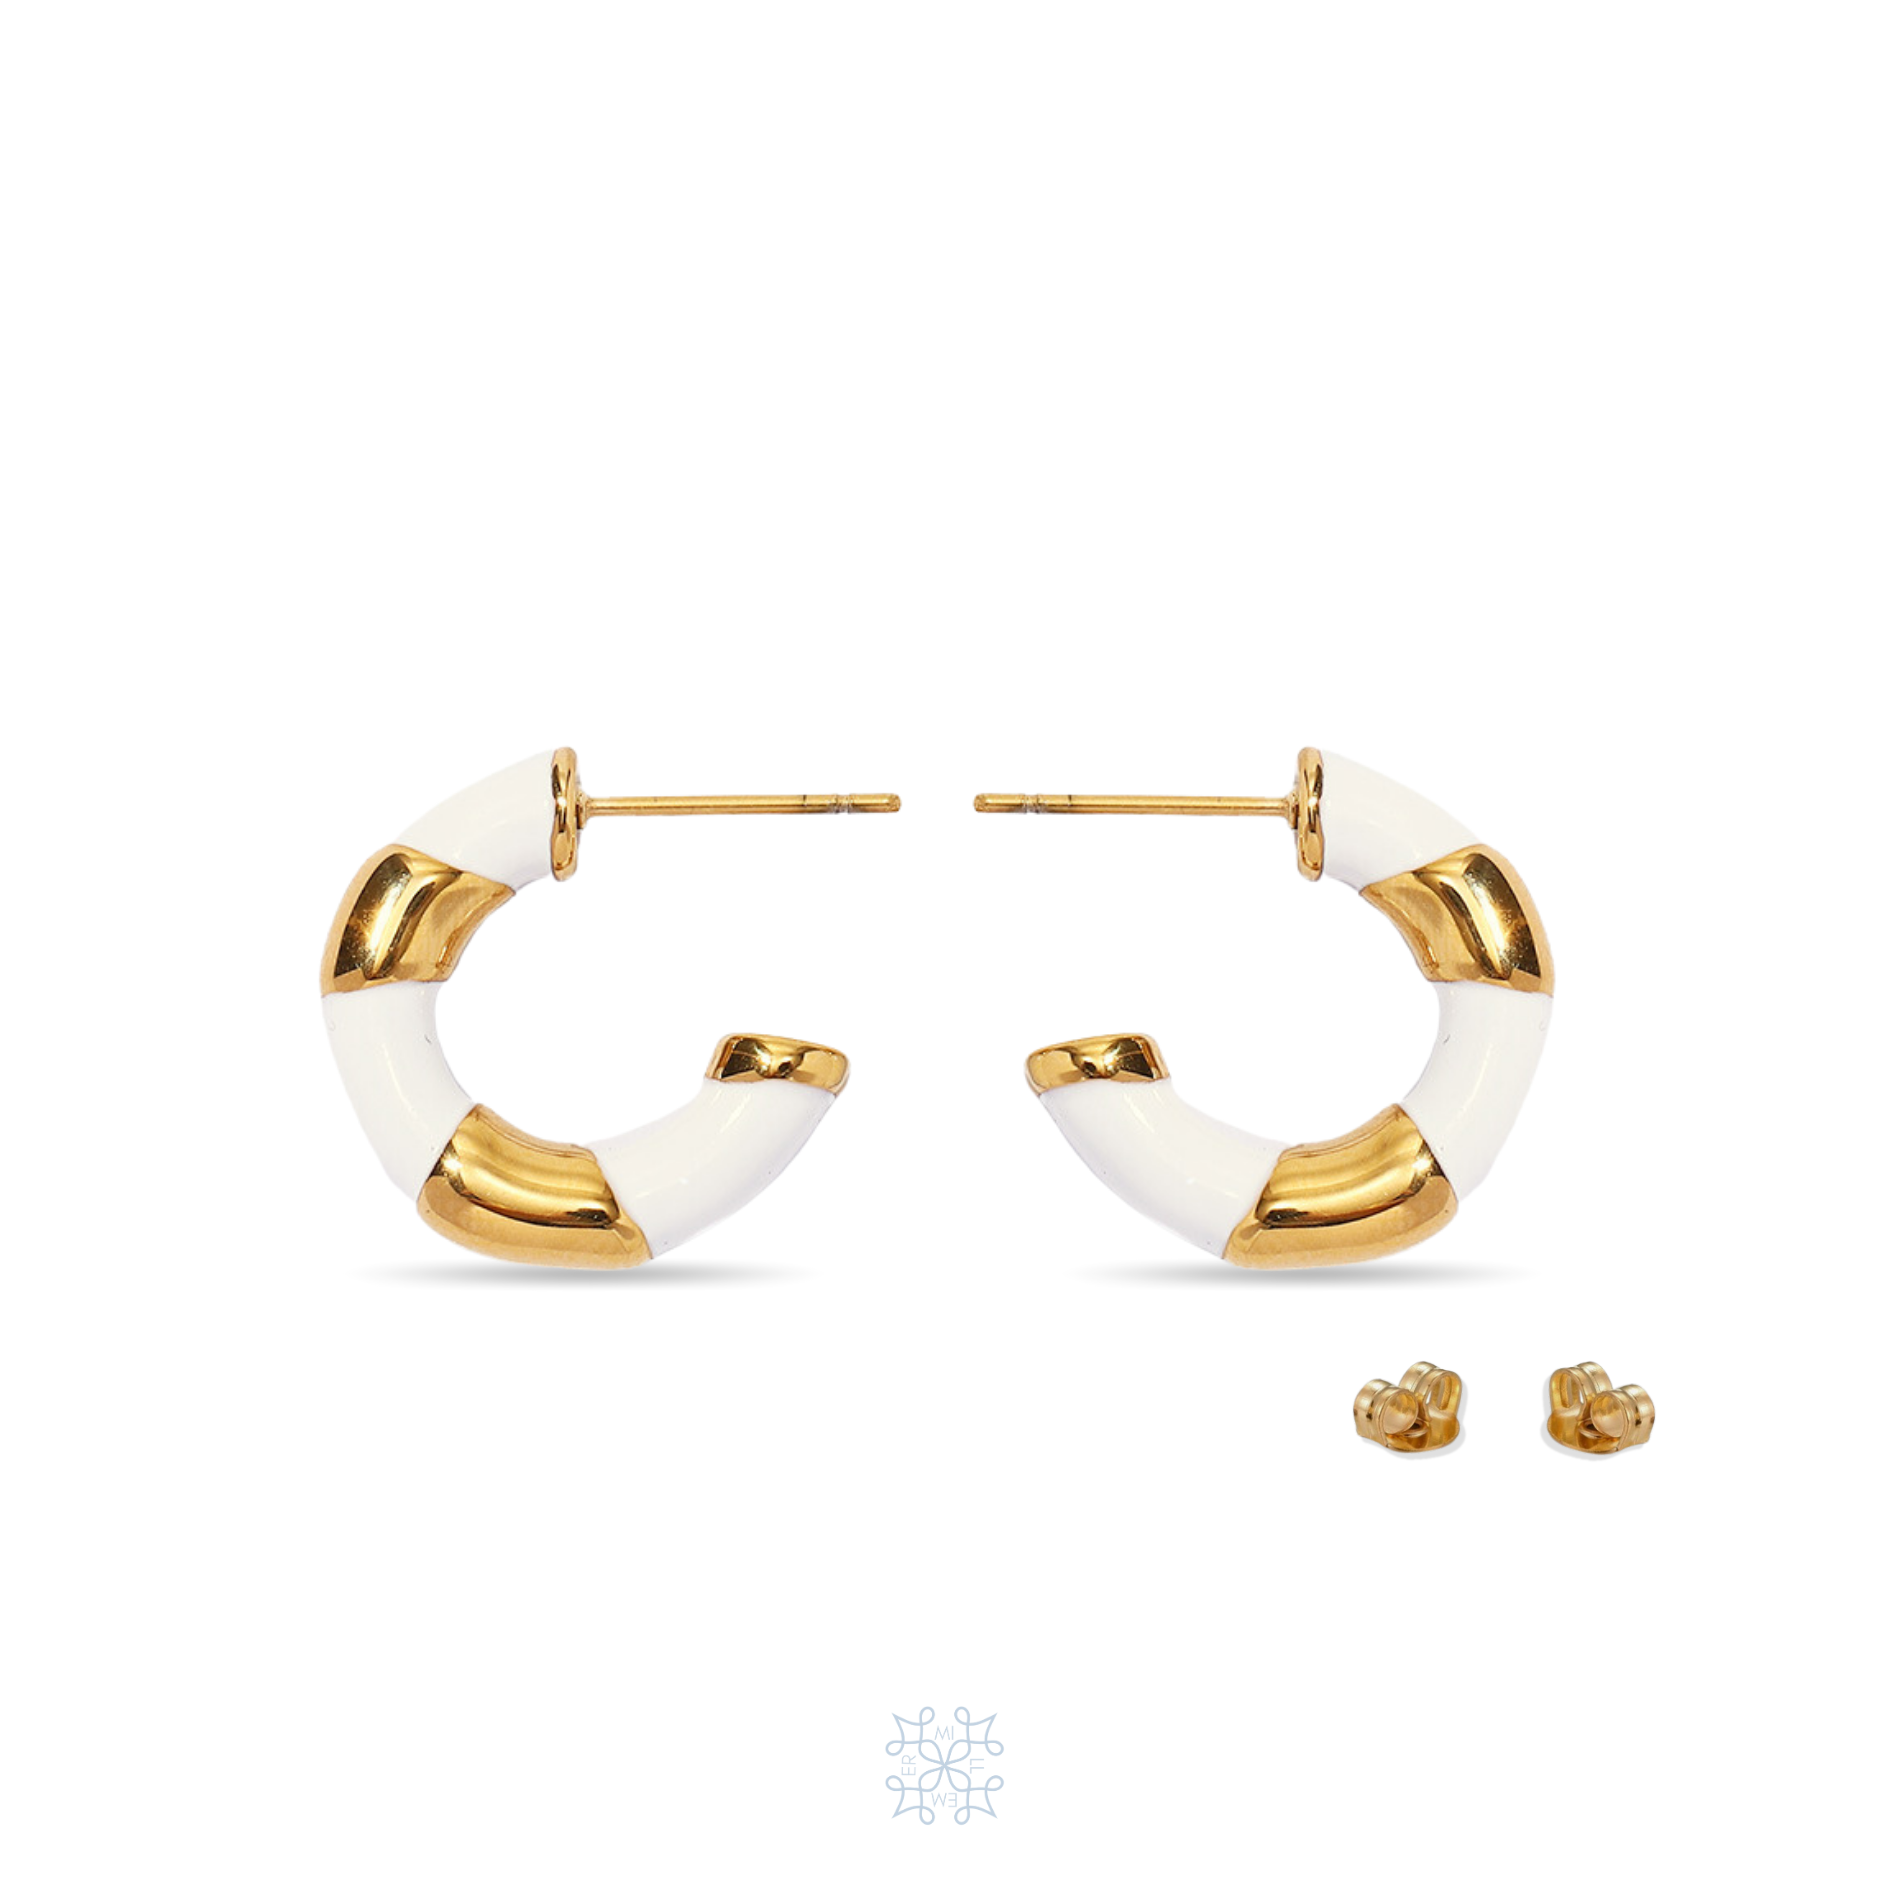 Gold hoop earrings painted with white enamel like a twisted ribbon around the gold hoop creating a two coloured hoop, white and gold hoop. RUBAN White Hoop Gold Earrings.